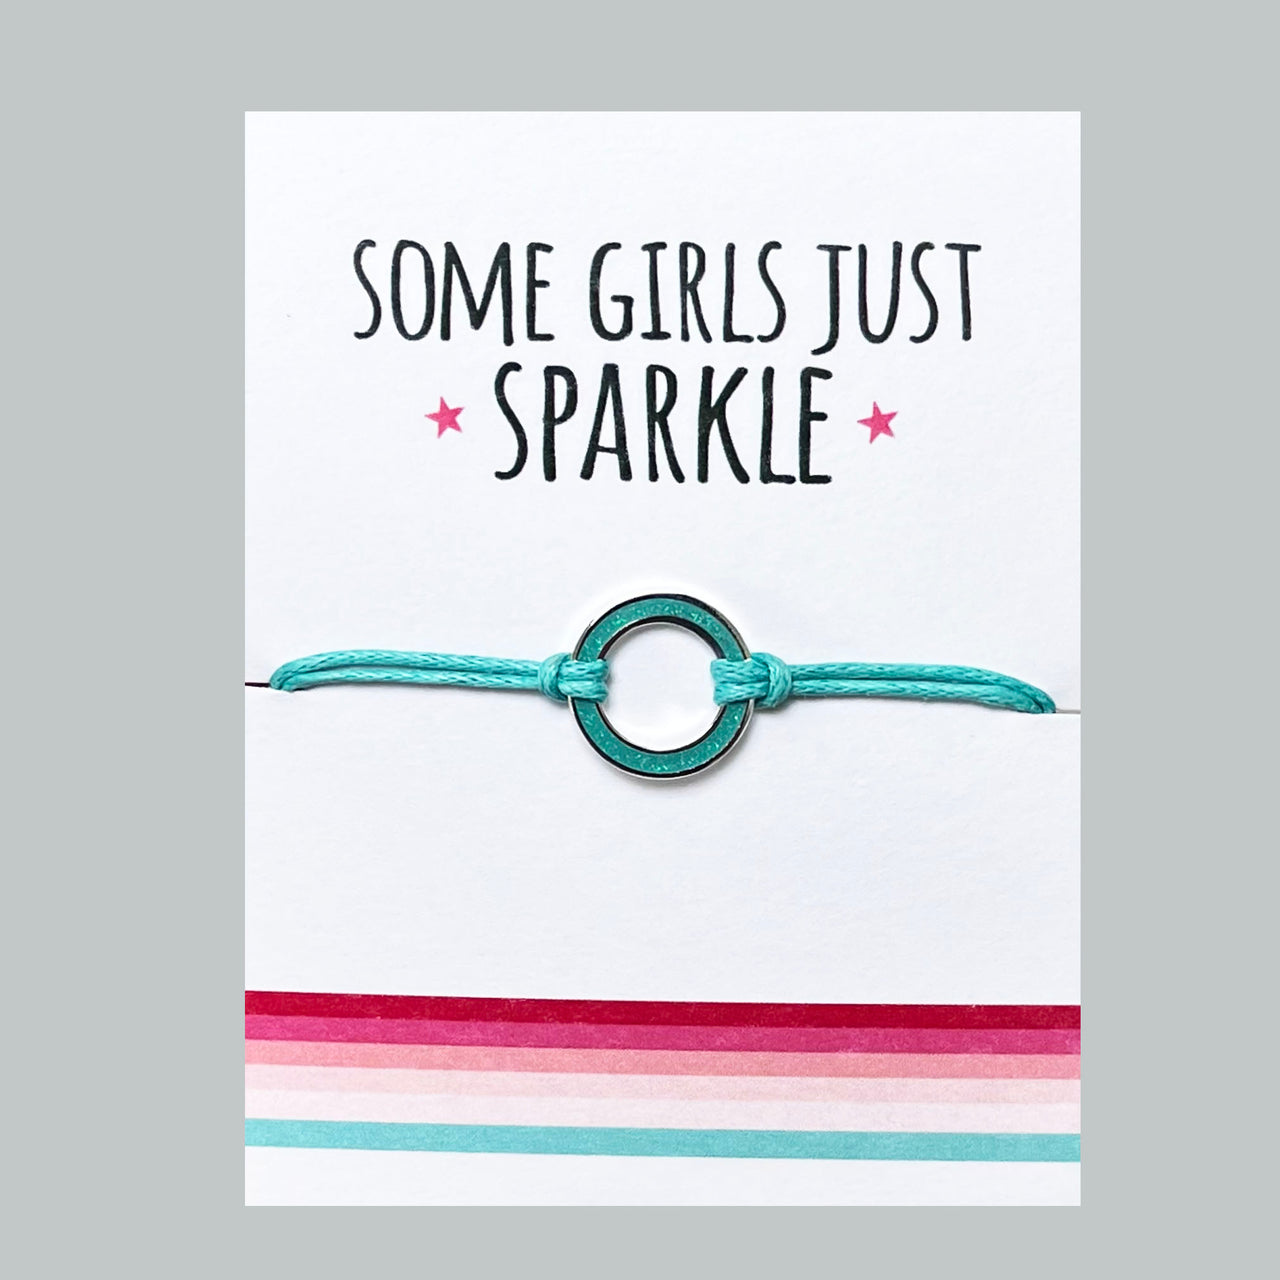 Some girls just sparkle